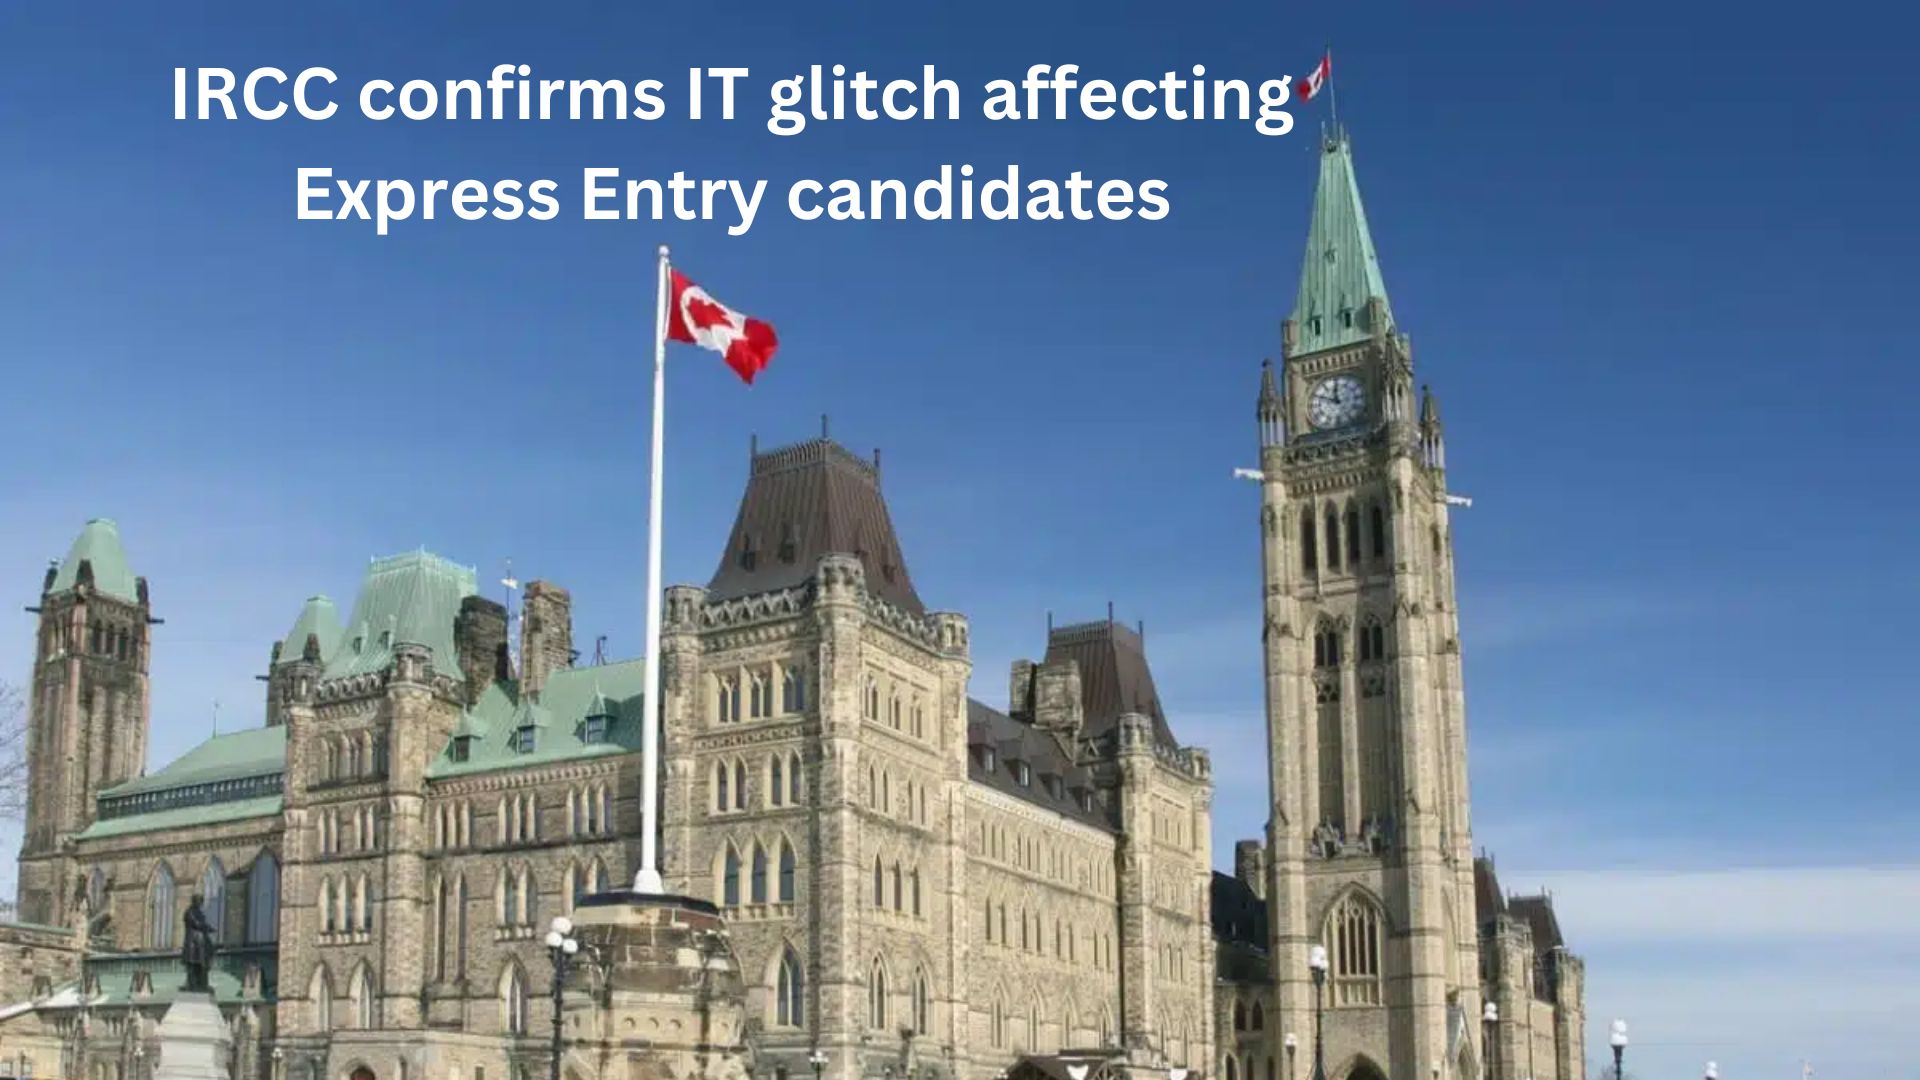 IRCC confirms IT glitch affecting Express Entry candidates